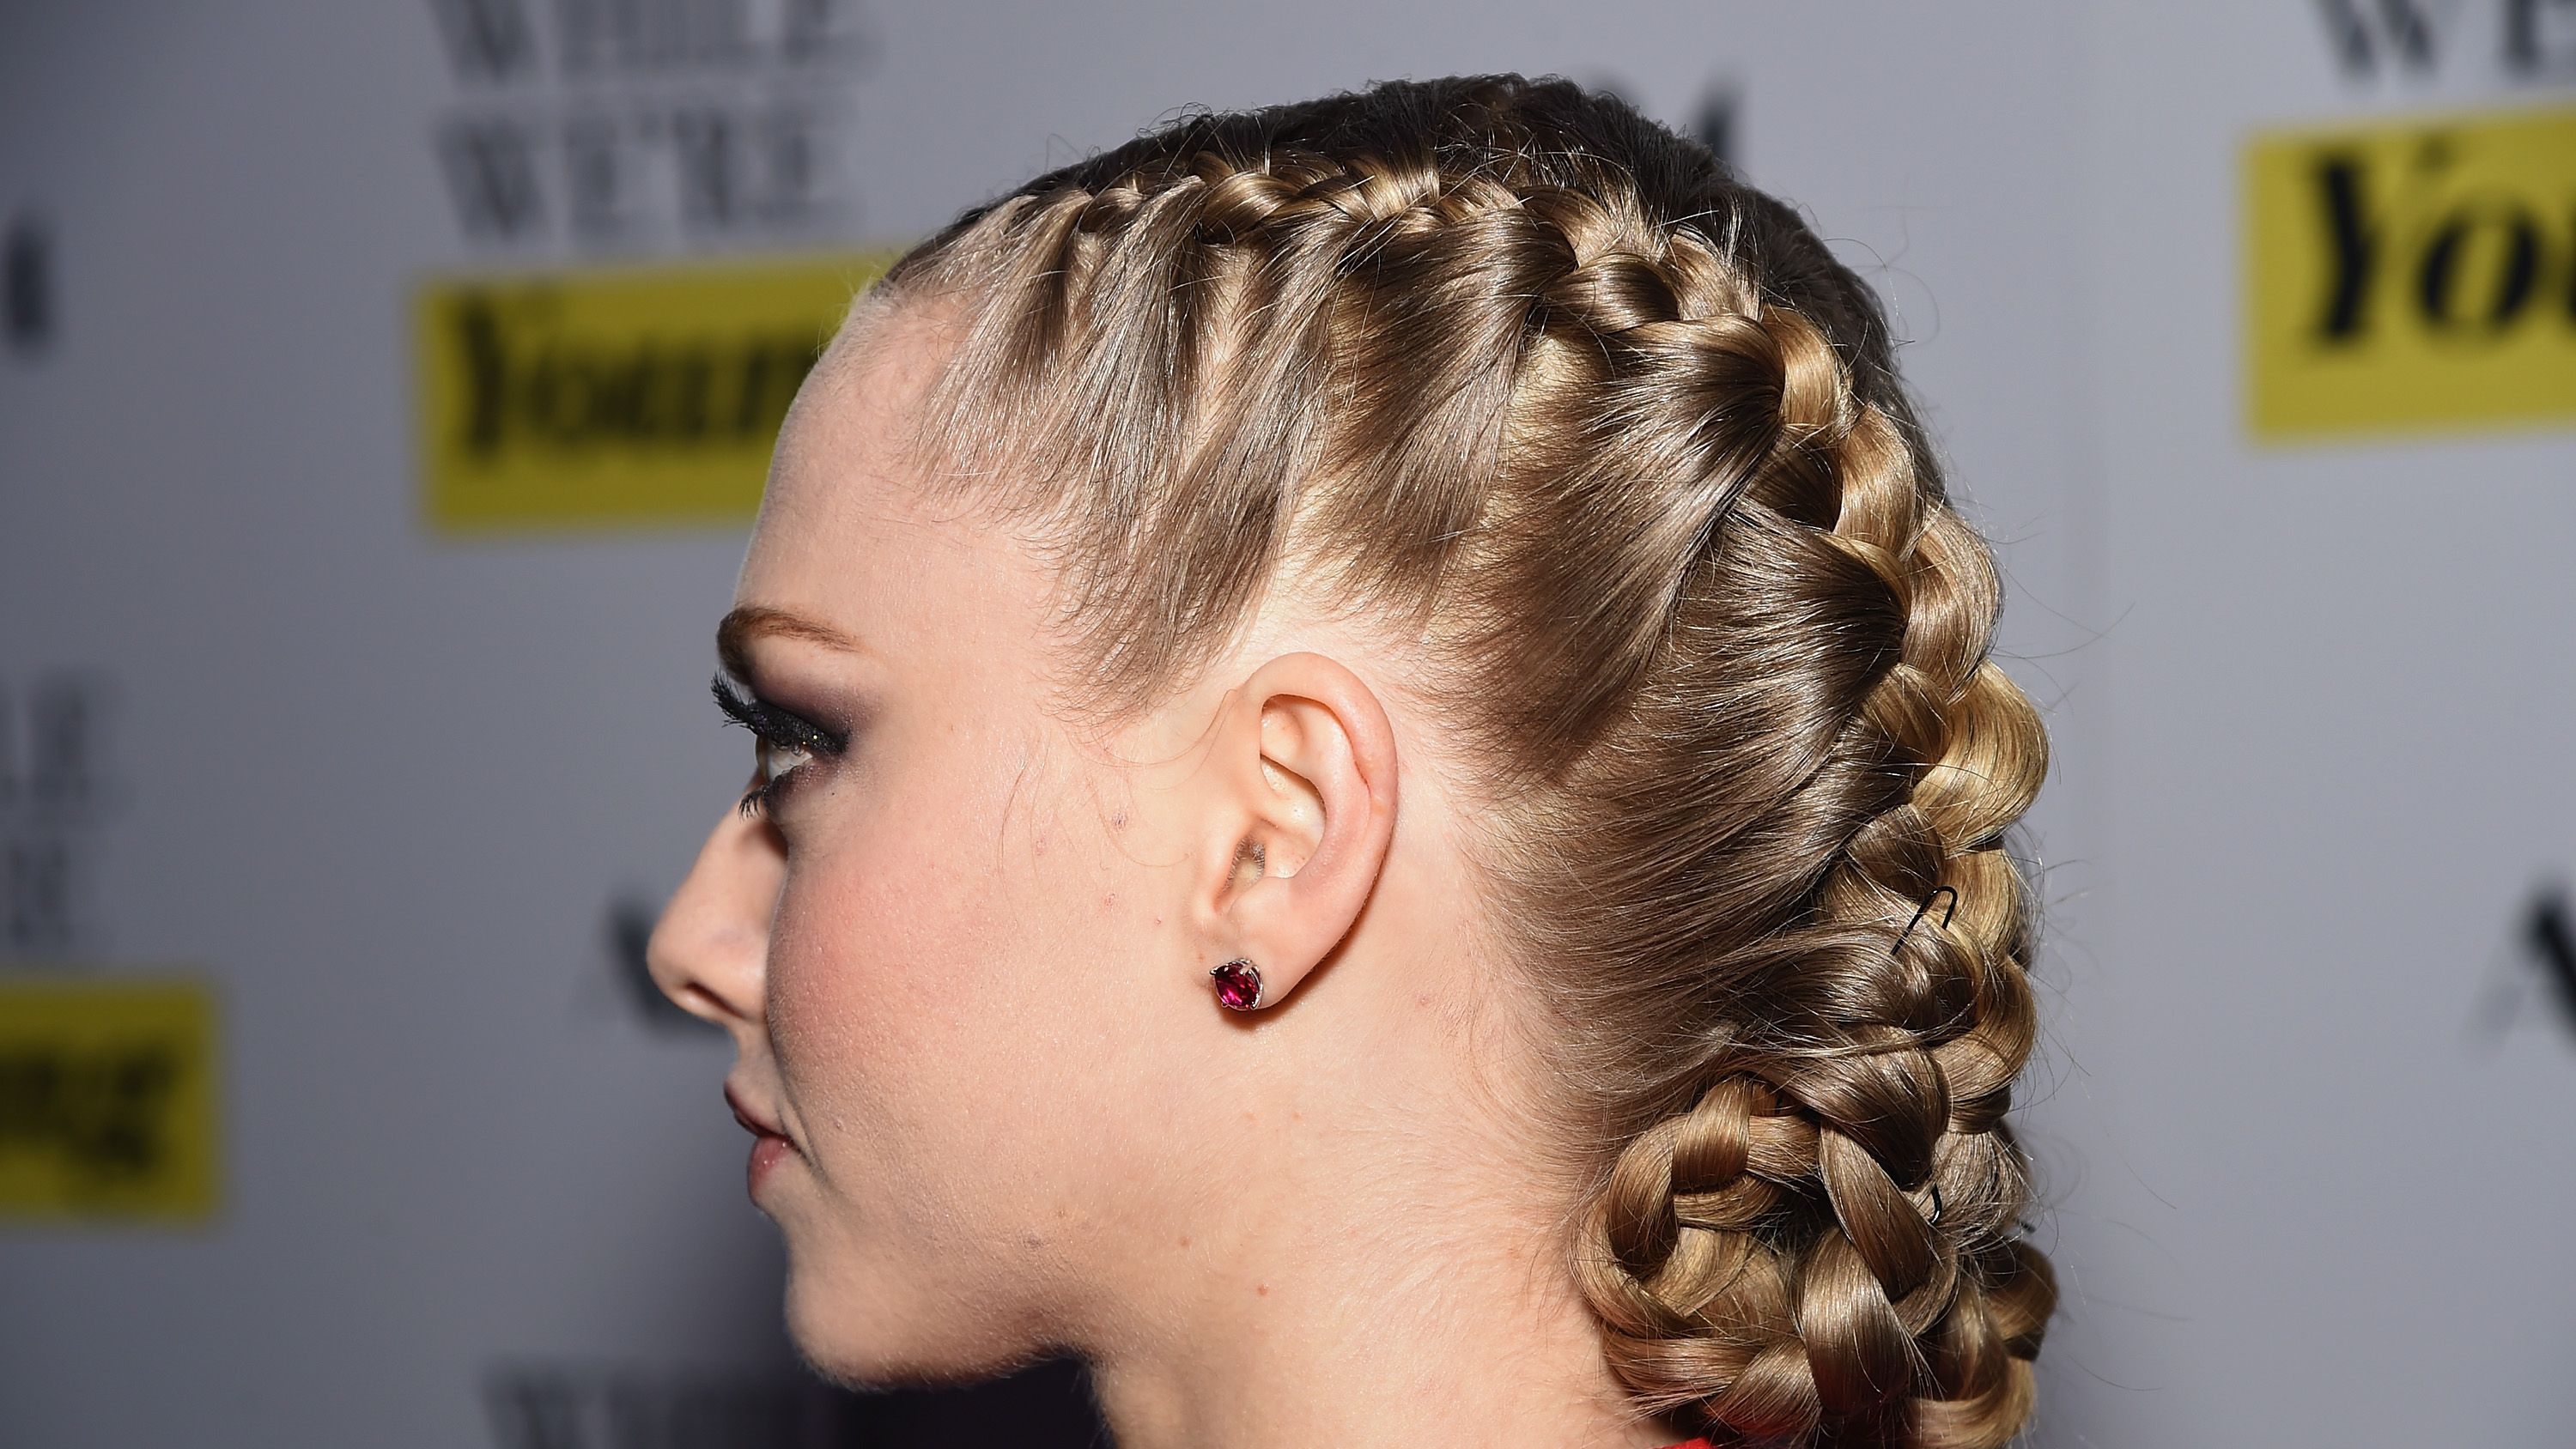 How to French Braid Your Hair: Step-by-Step Photo Tutorial